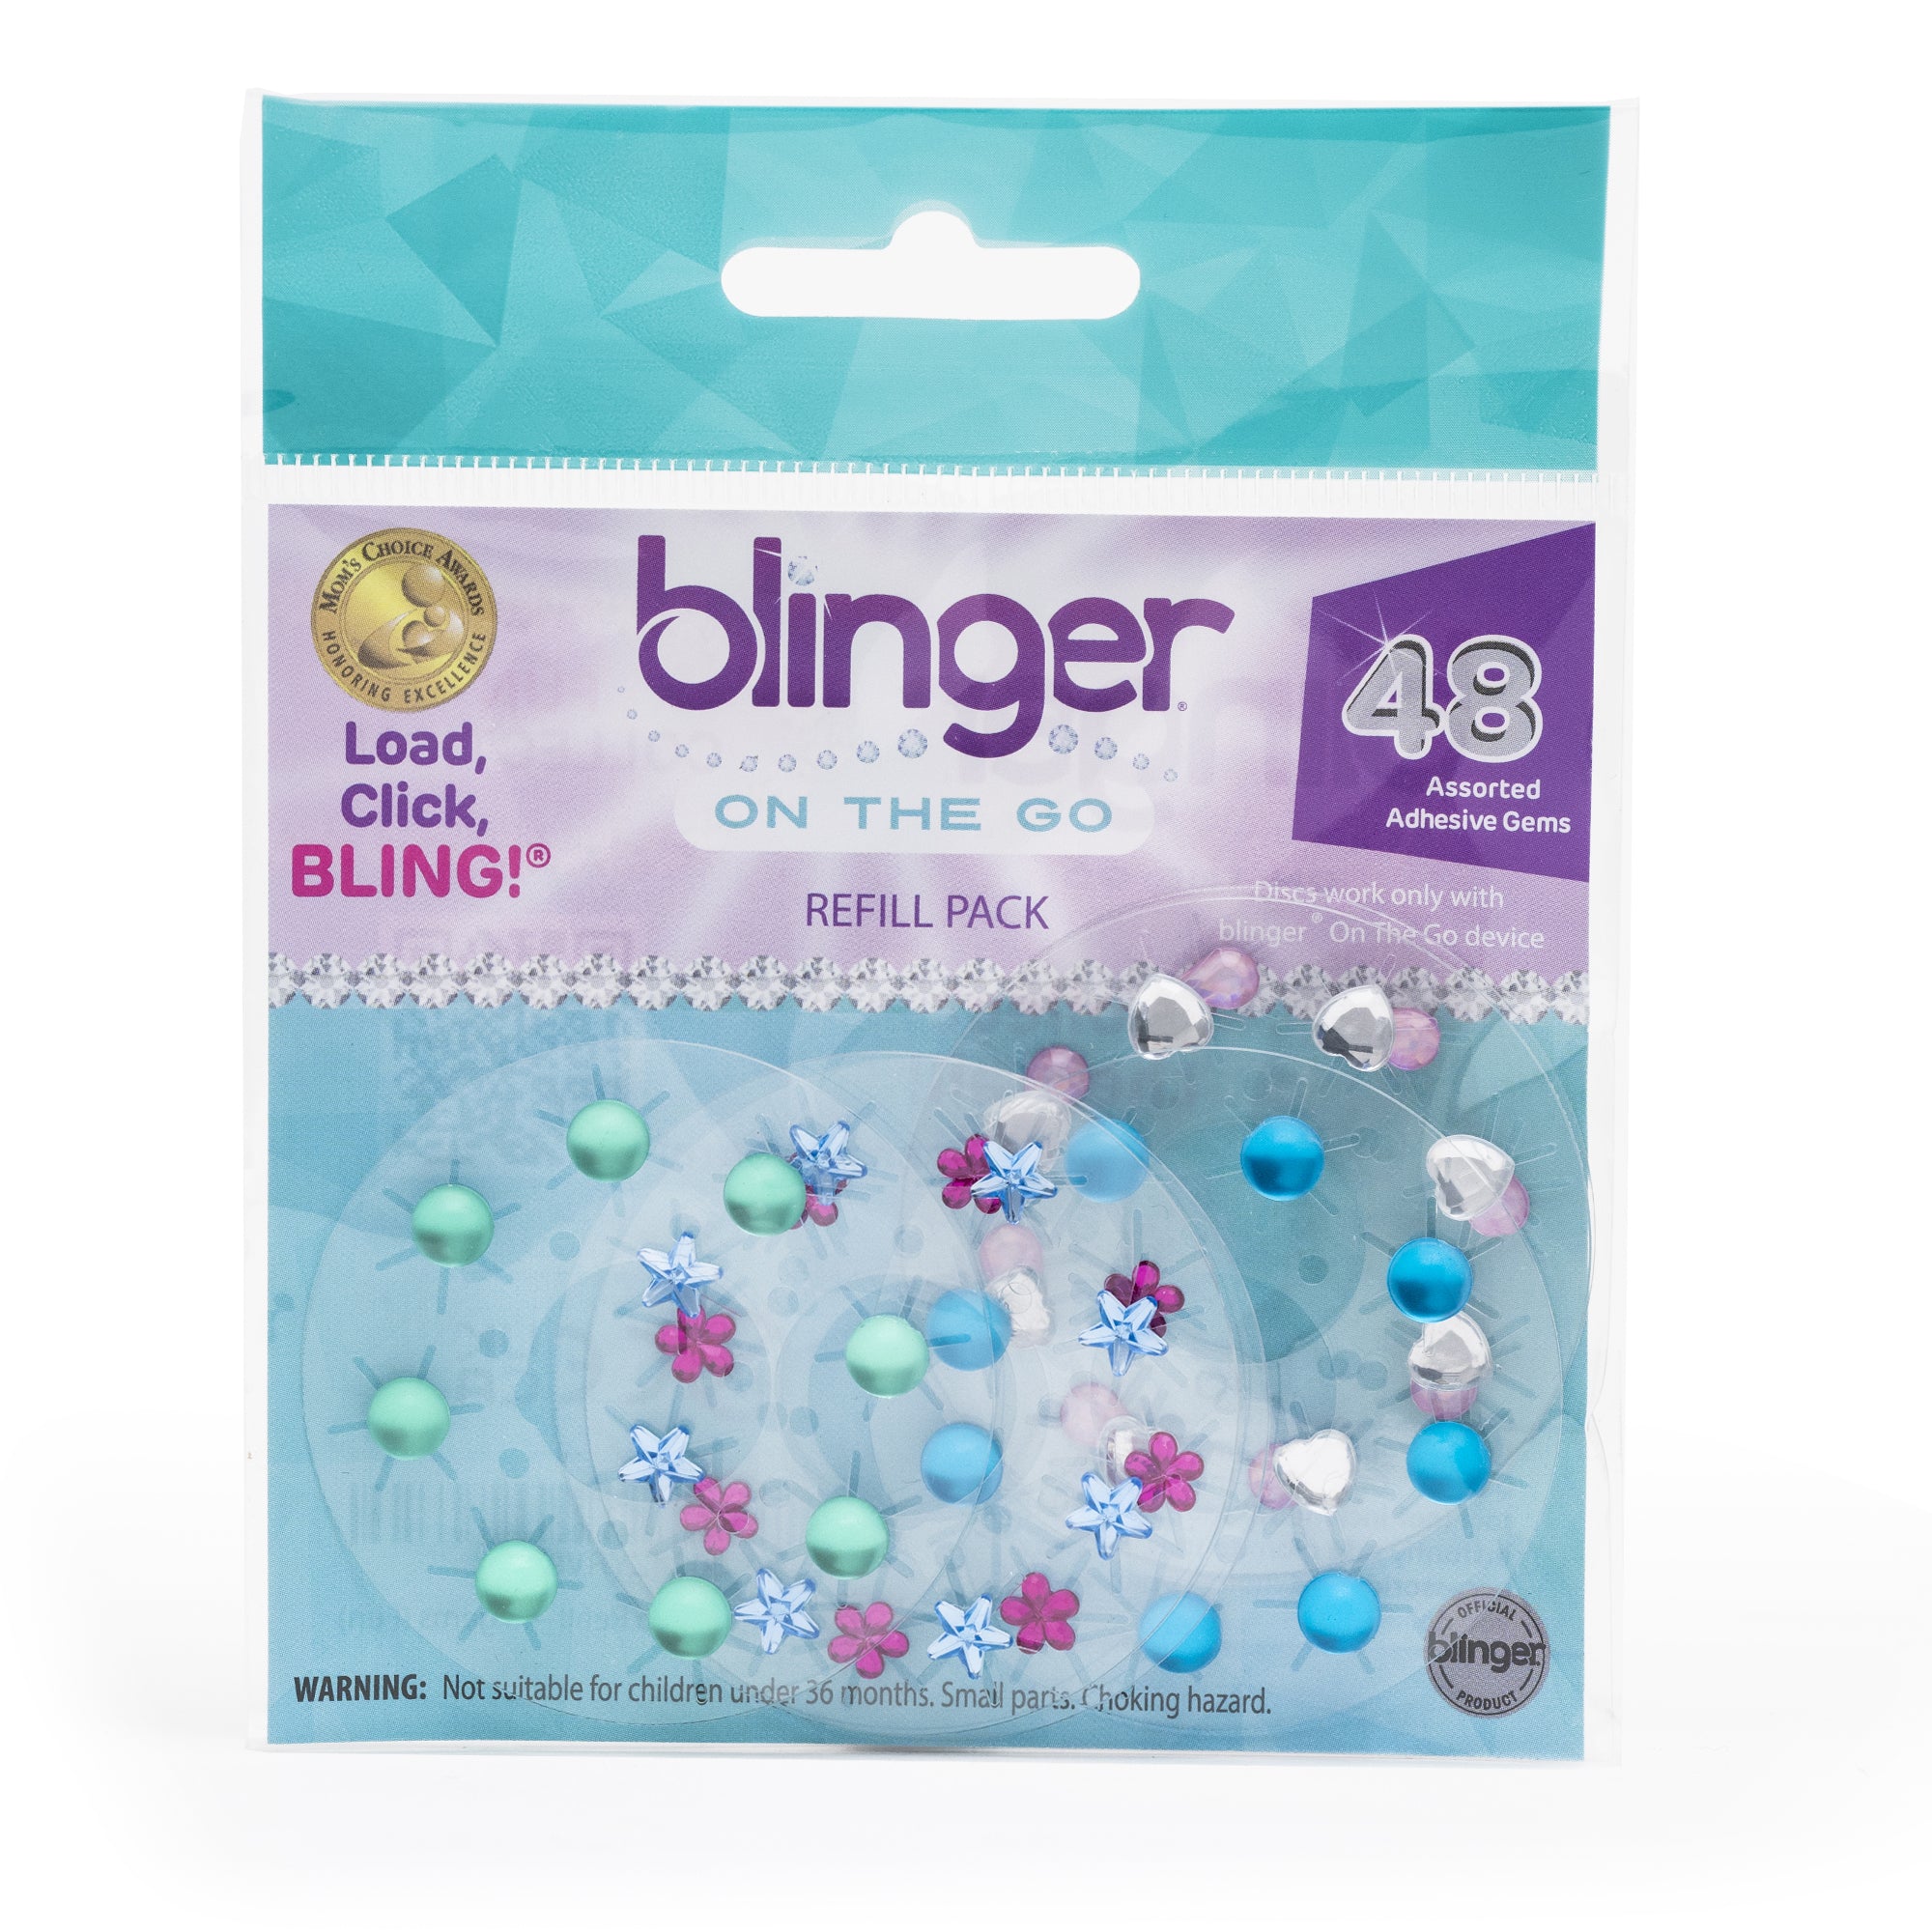 blinger® On The Go (Mini) Refill Pack with 48 Colorful Acrylic Gems